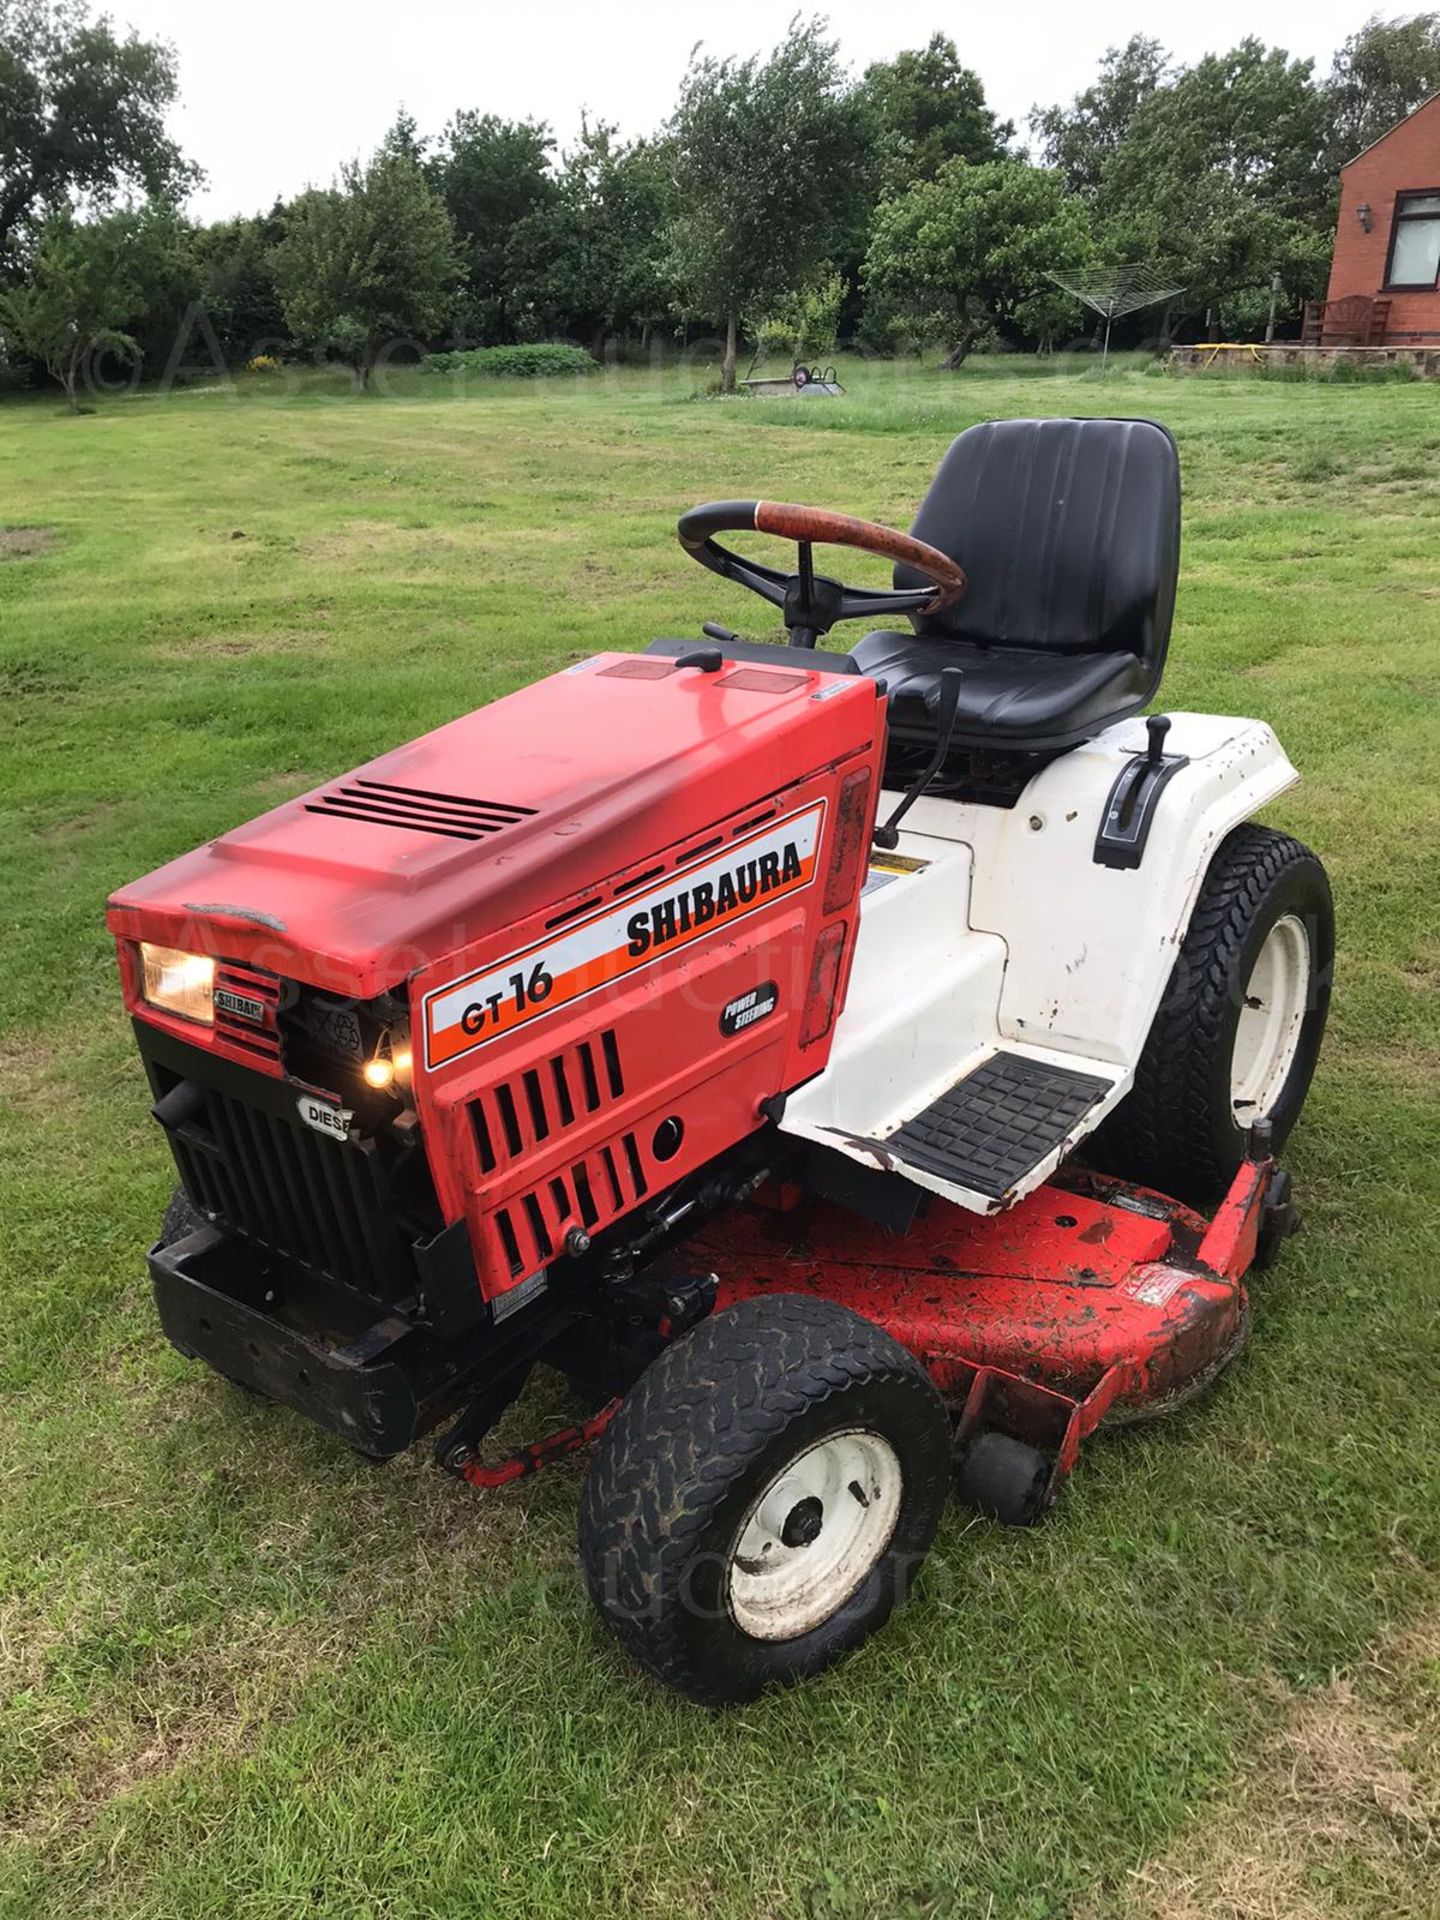 DIESEL SHIBAURA GT16 RIDE ON LAWN MOWER, RUNS, DRIVES AND CUTS, HYDROSTATIC DRIVE, *NO VAT* - Image 2 of 5